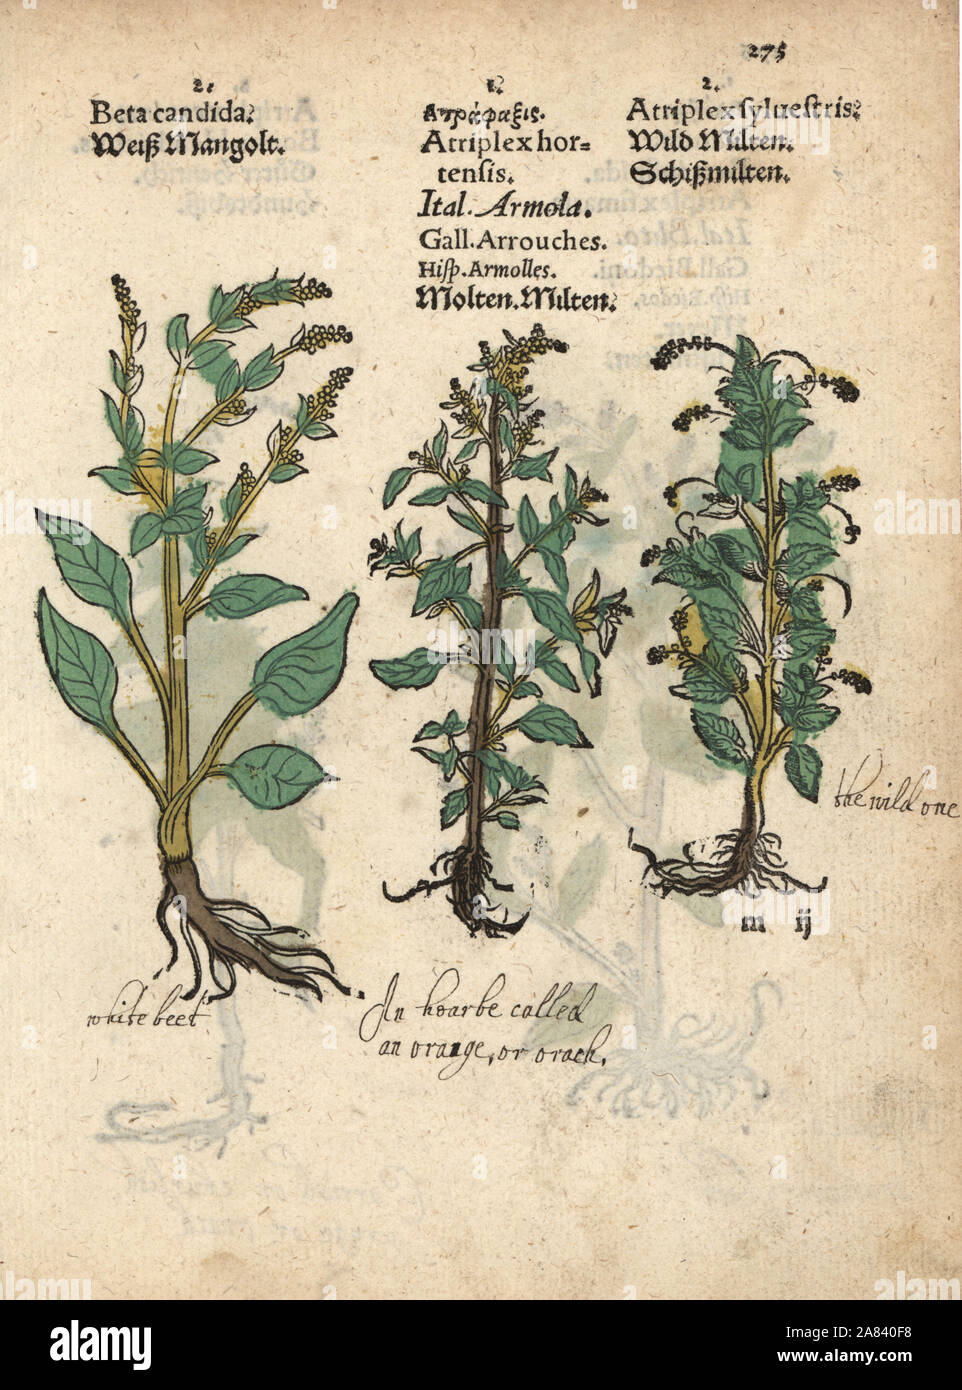 White beet, Beta vulgaris, and garden orache, Atriplex hortensis. Handcoloured woodblock engraving of a botanical illustration from Adam Lonicer's Krauterbuch, or Herbal, Frankfurt, 1557. This from a 17th century pirate edition or atlas of illustrations only, with captions in Latin, Greek, French, Italian, German, and in English manuscript. Stock Photo